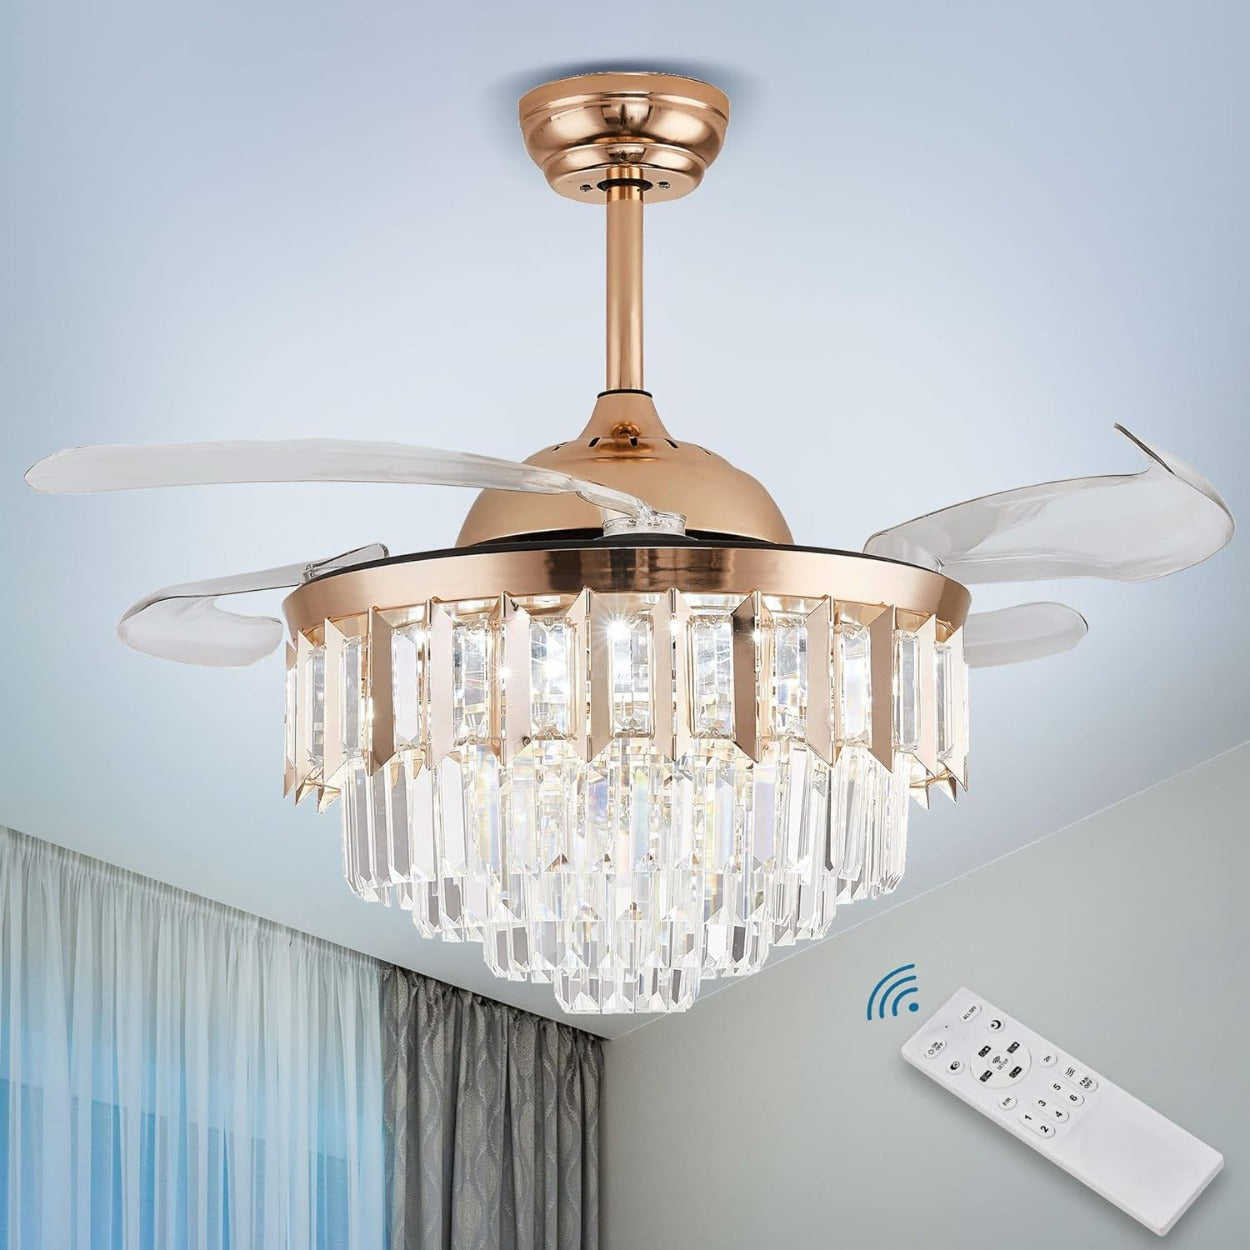 Ankur Breezo Crystal Led Ceiling Fan With Chandelier And Remote Controller 42 Inches Moderm Fandelier At The Lowest In India